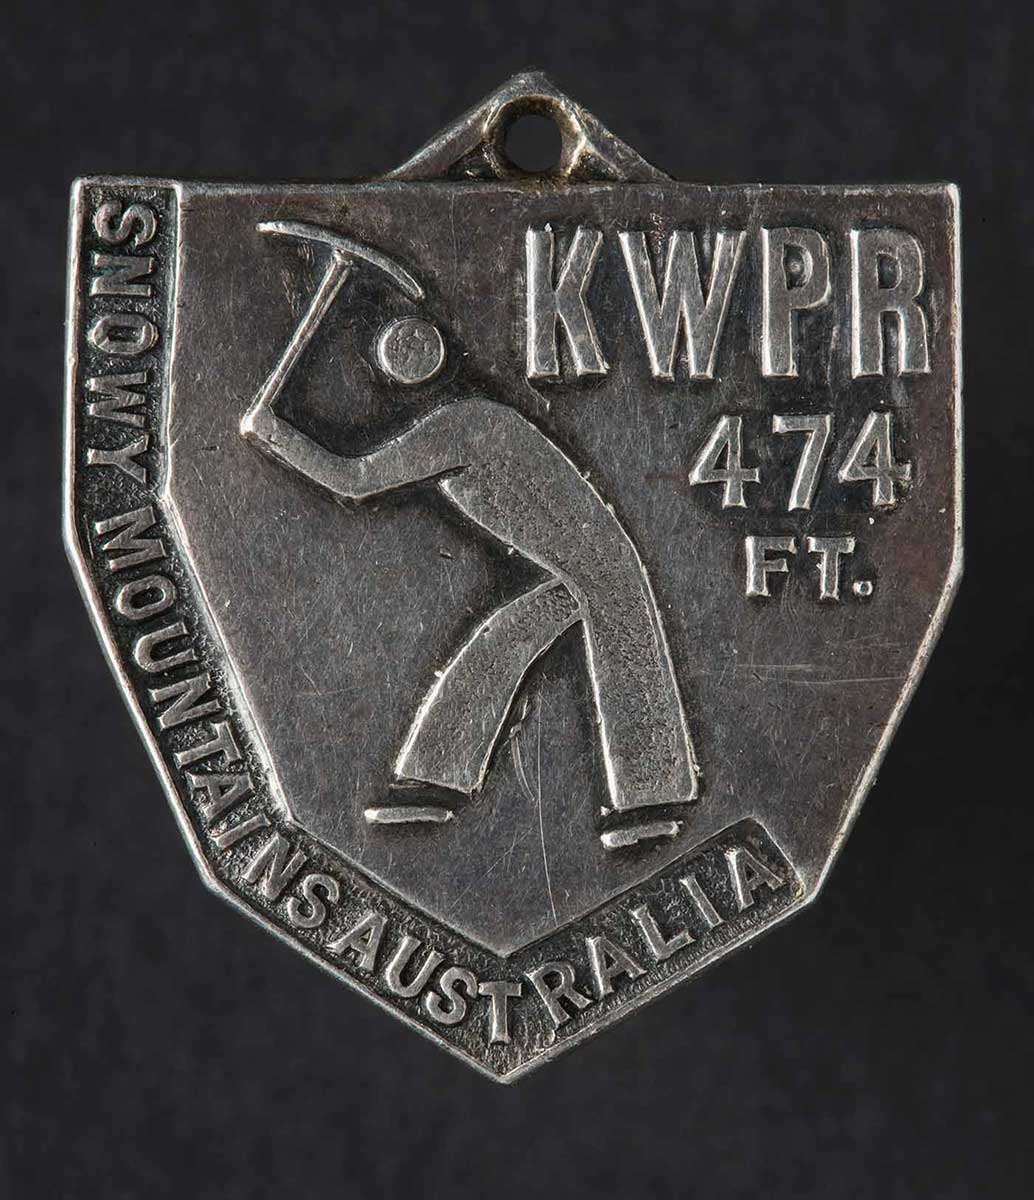 An image of a worker holding a tool above his head and in a digging stance is in the centre of the medal. 'KWPR 474 FT' is written in the top right corner and 'Snowy Mountains Australia' is written down the left hand side. - click to view larger image